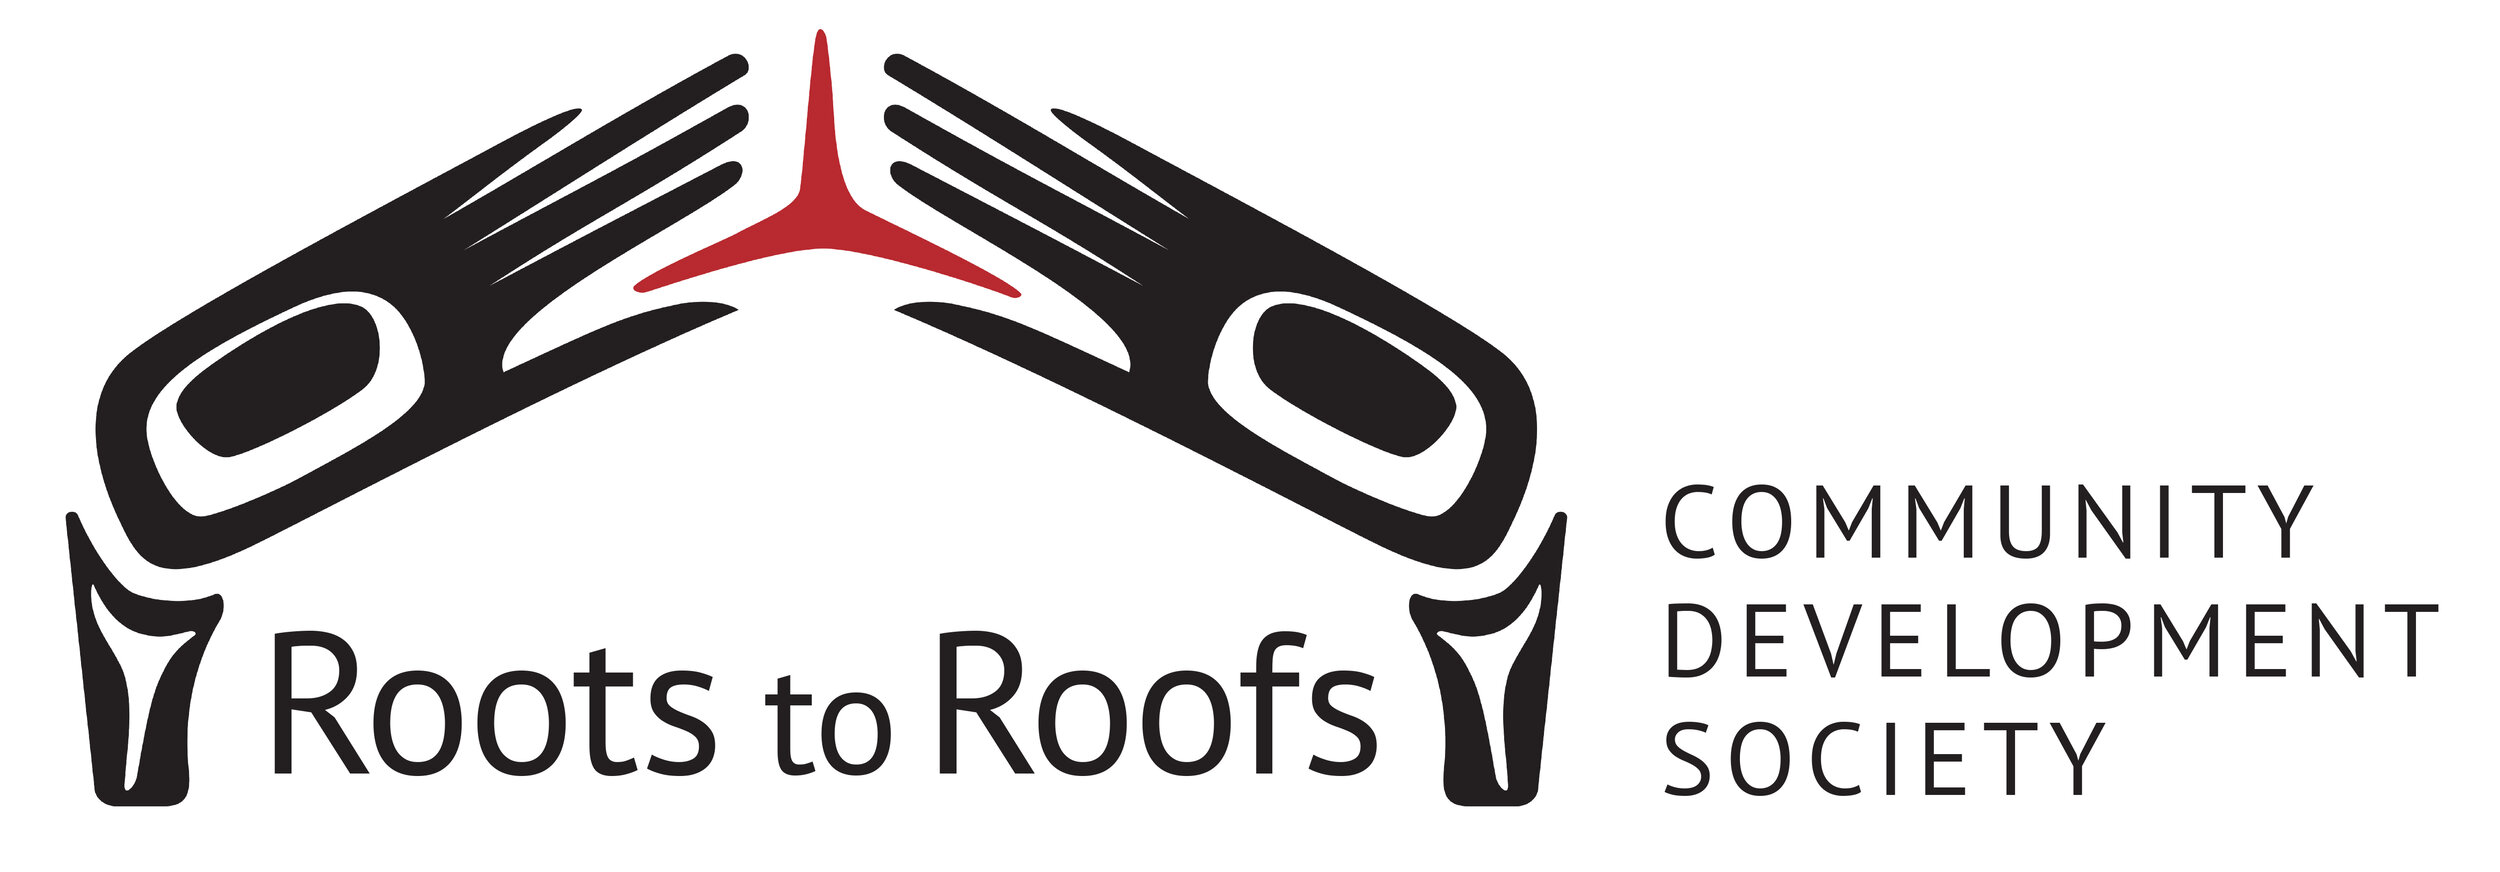 Roots to Roofs